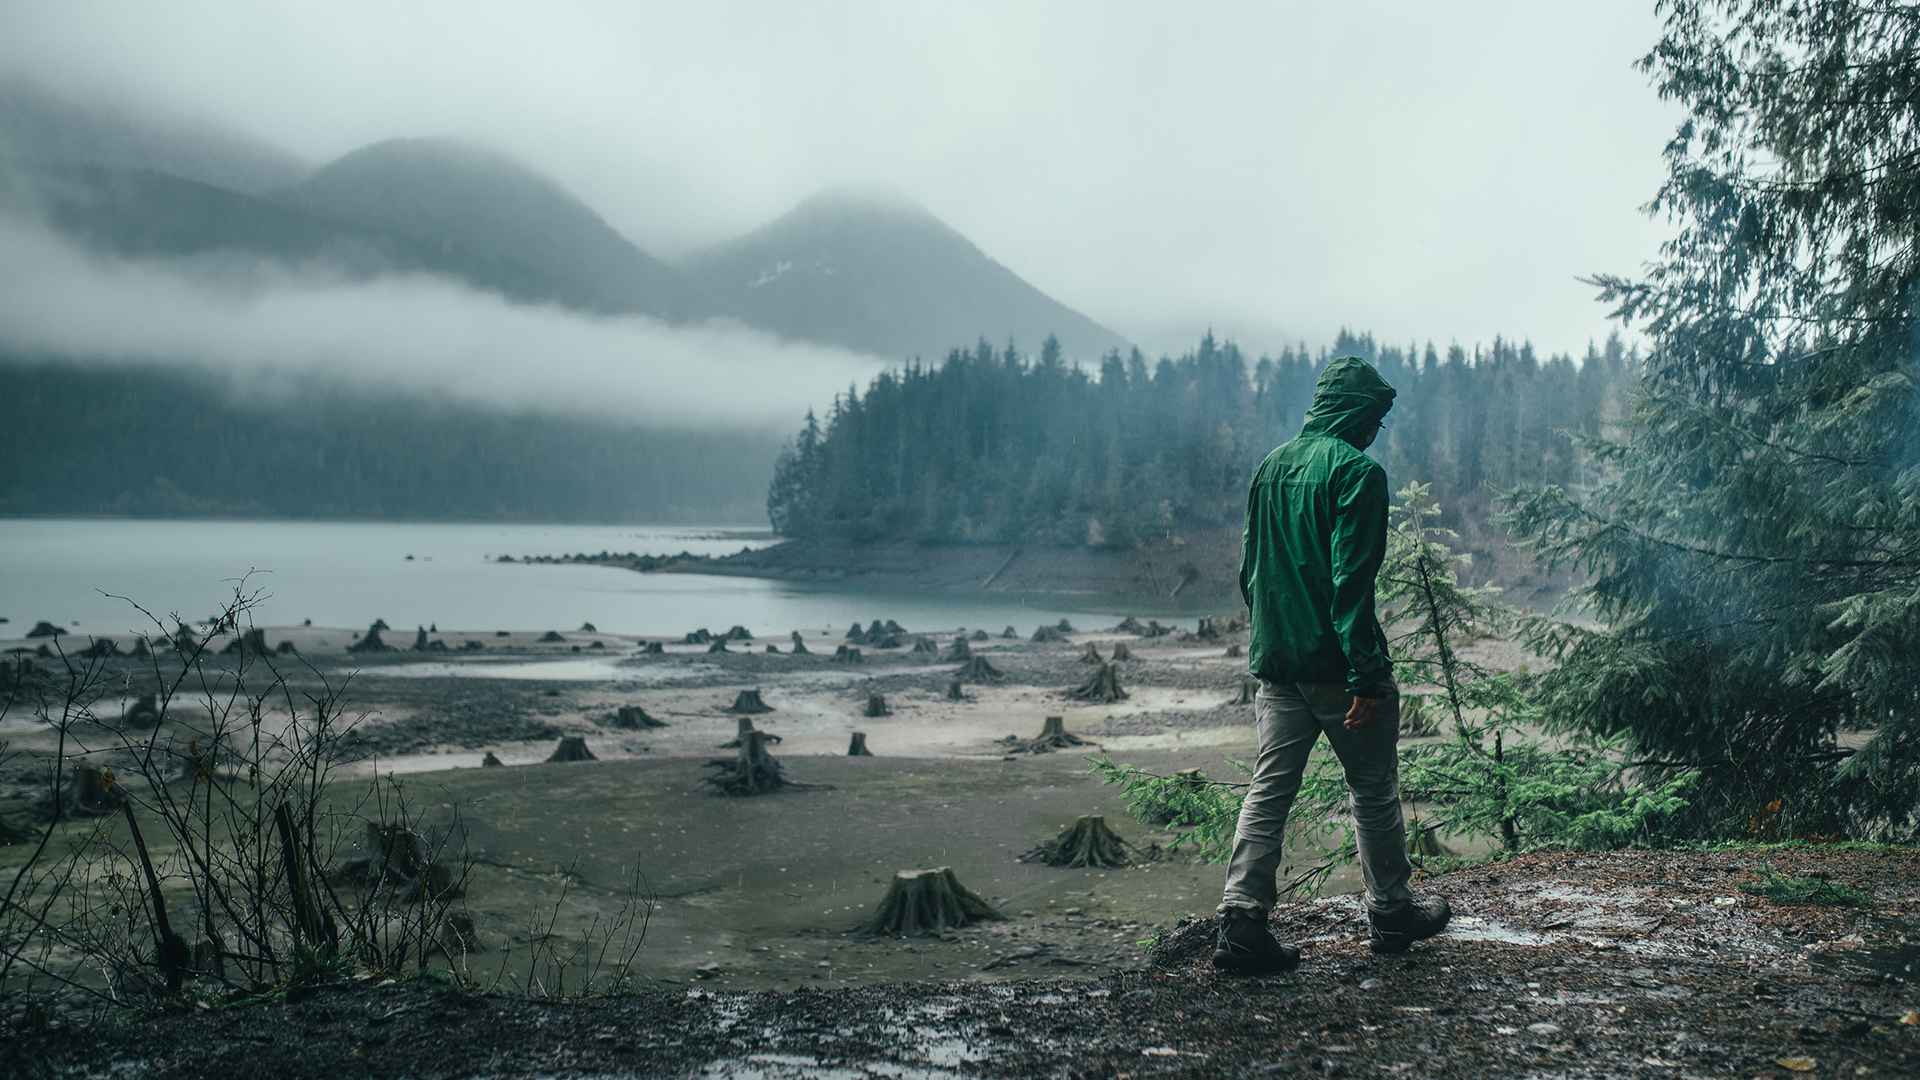 Interview: Dylan Furst on photography and filmmaking